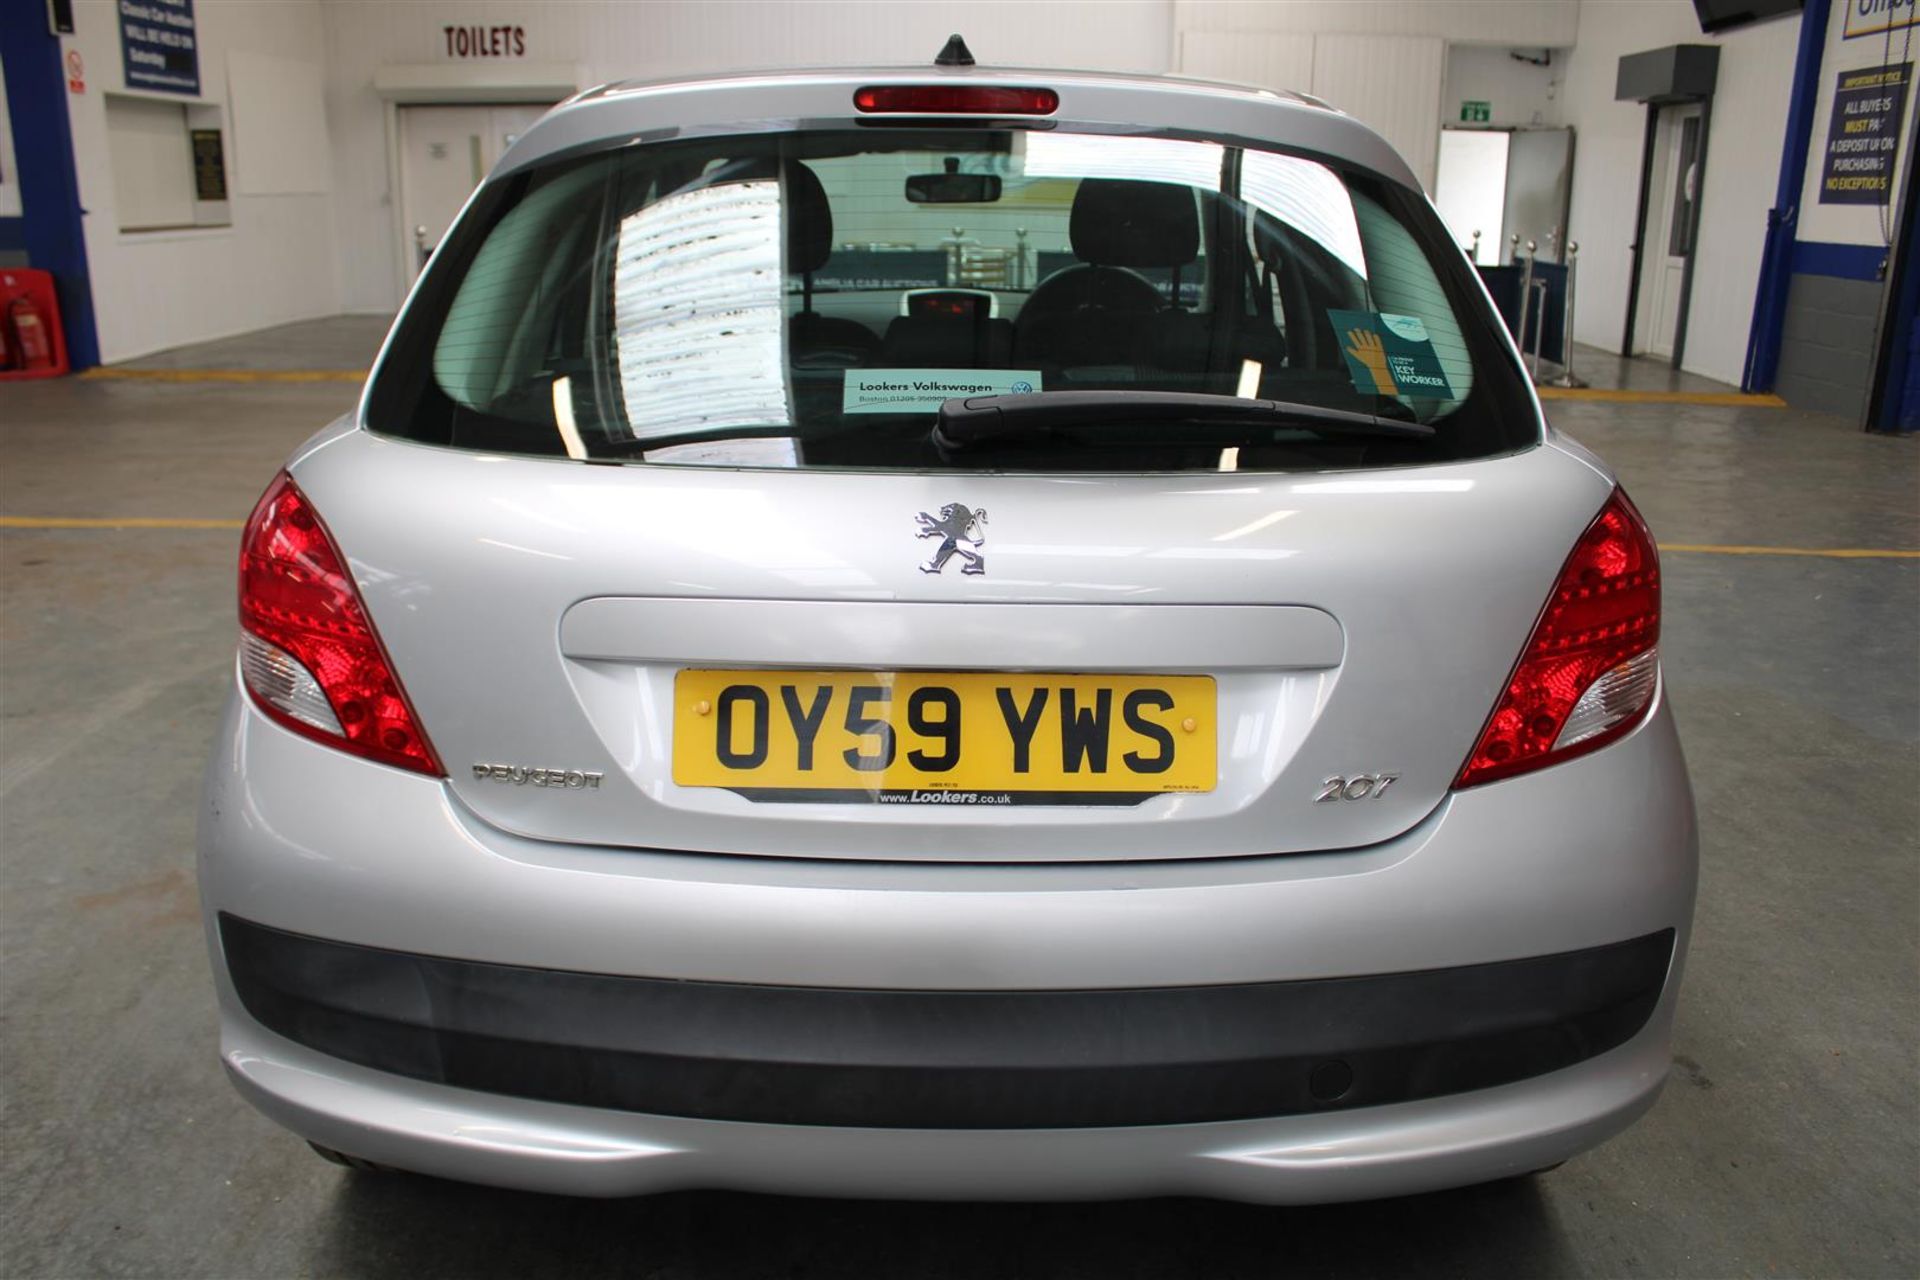 59 09 Peugeot 207 S - Image 32 of 36